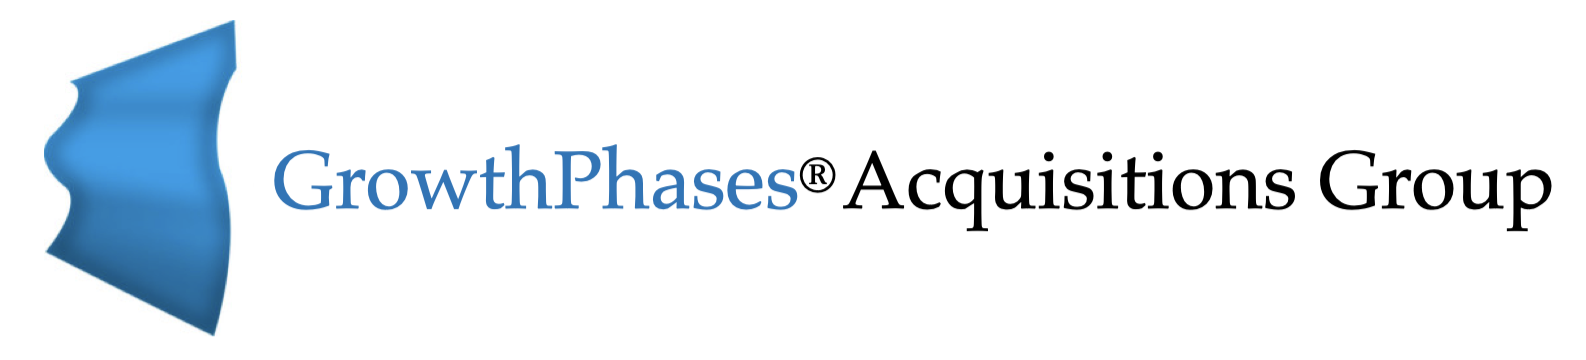 GrowthPhases® Acquisitions Group